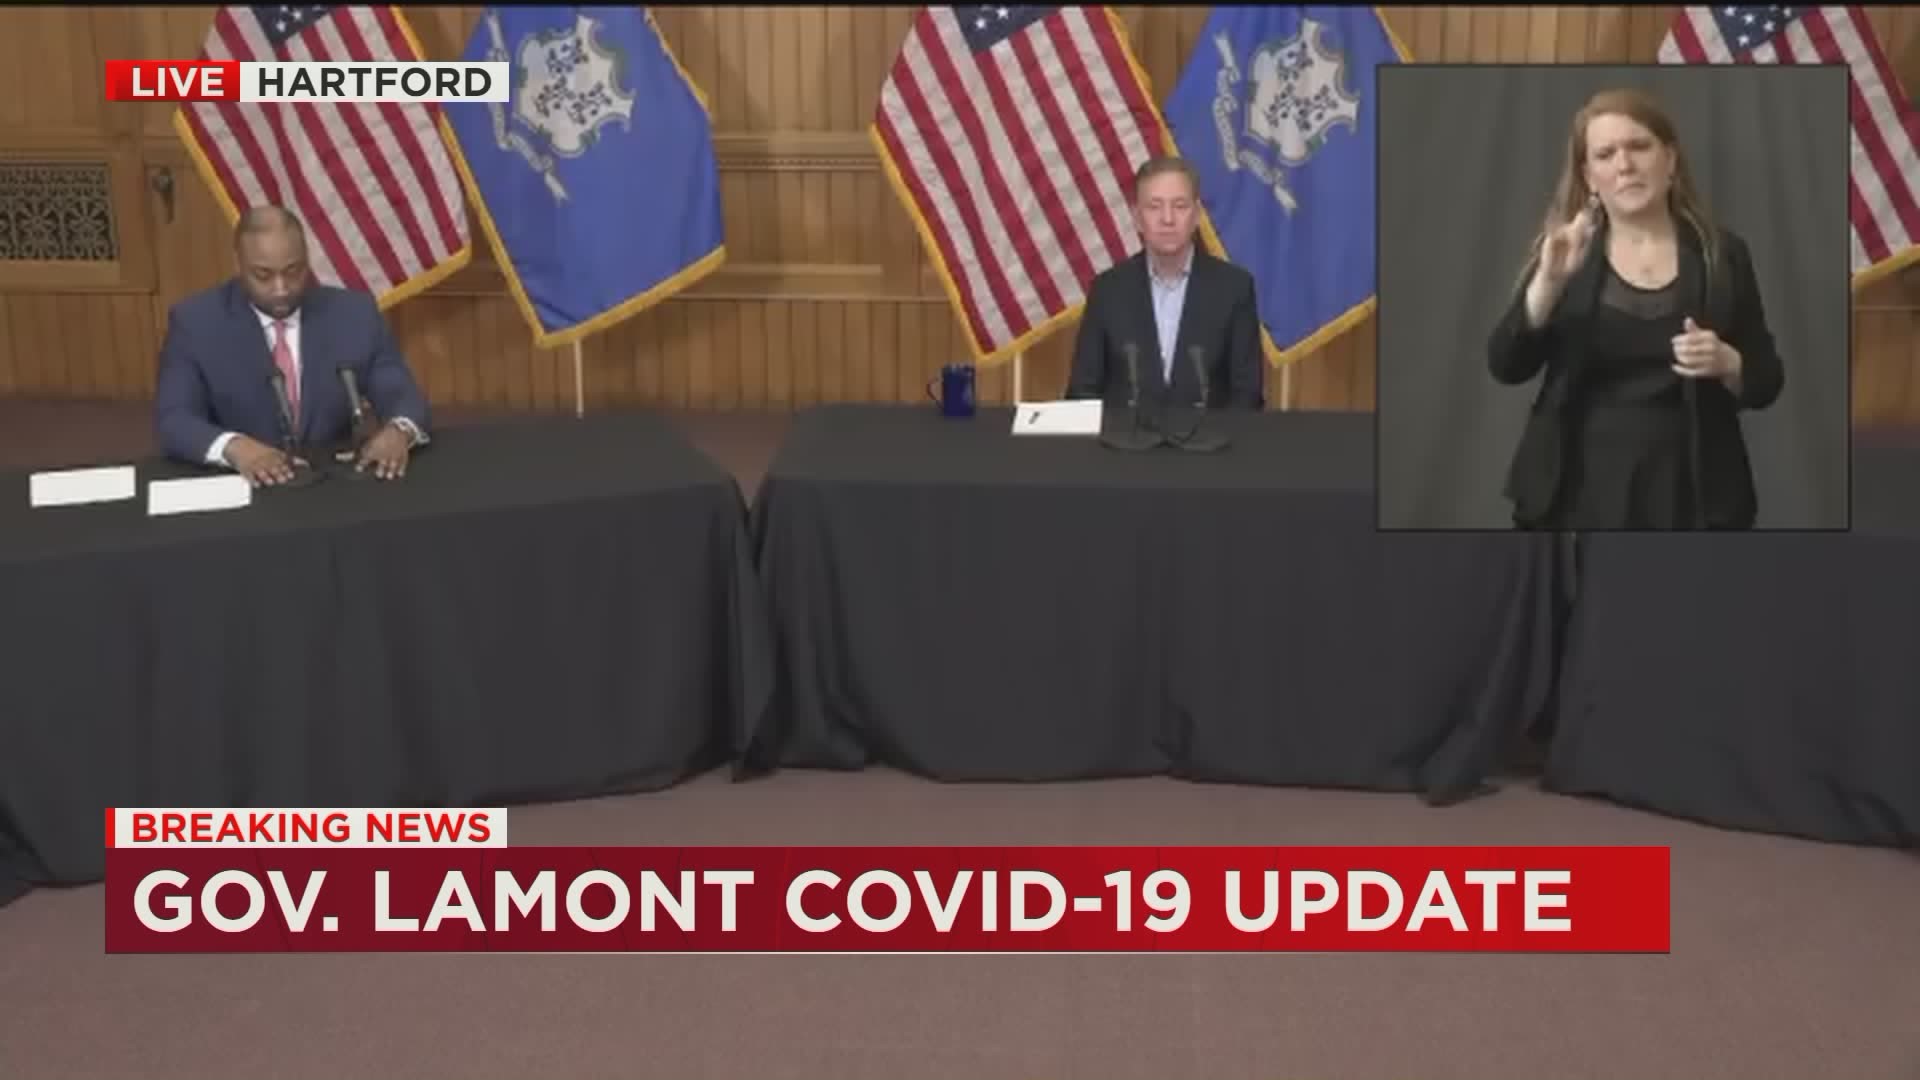 "This has been a non-partisan pandemic" | Gov. Lamont discusses being proud of how CT's lawmakers have worked together to fight through COVID-19.